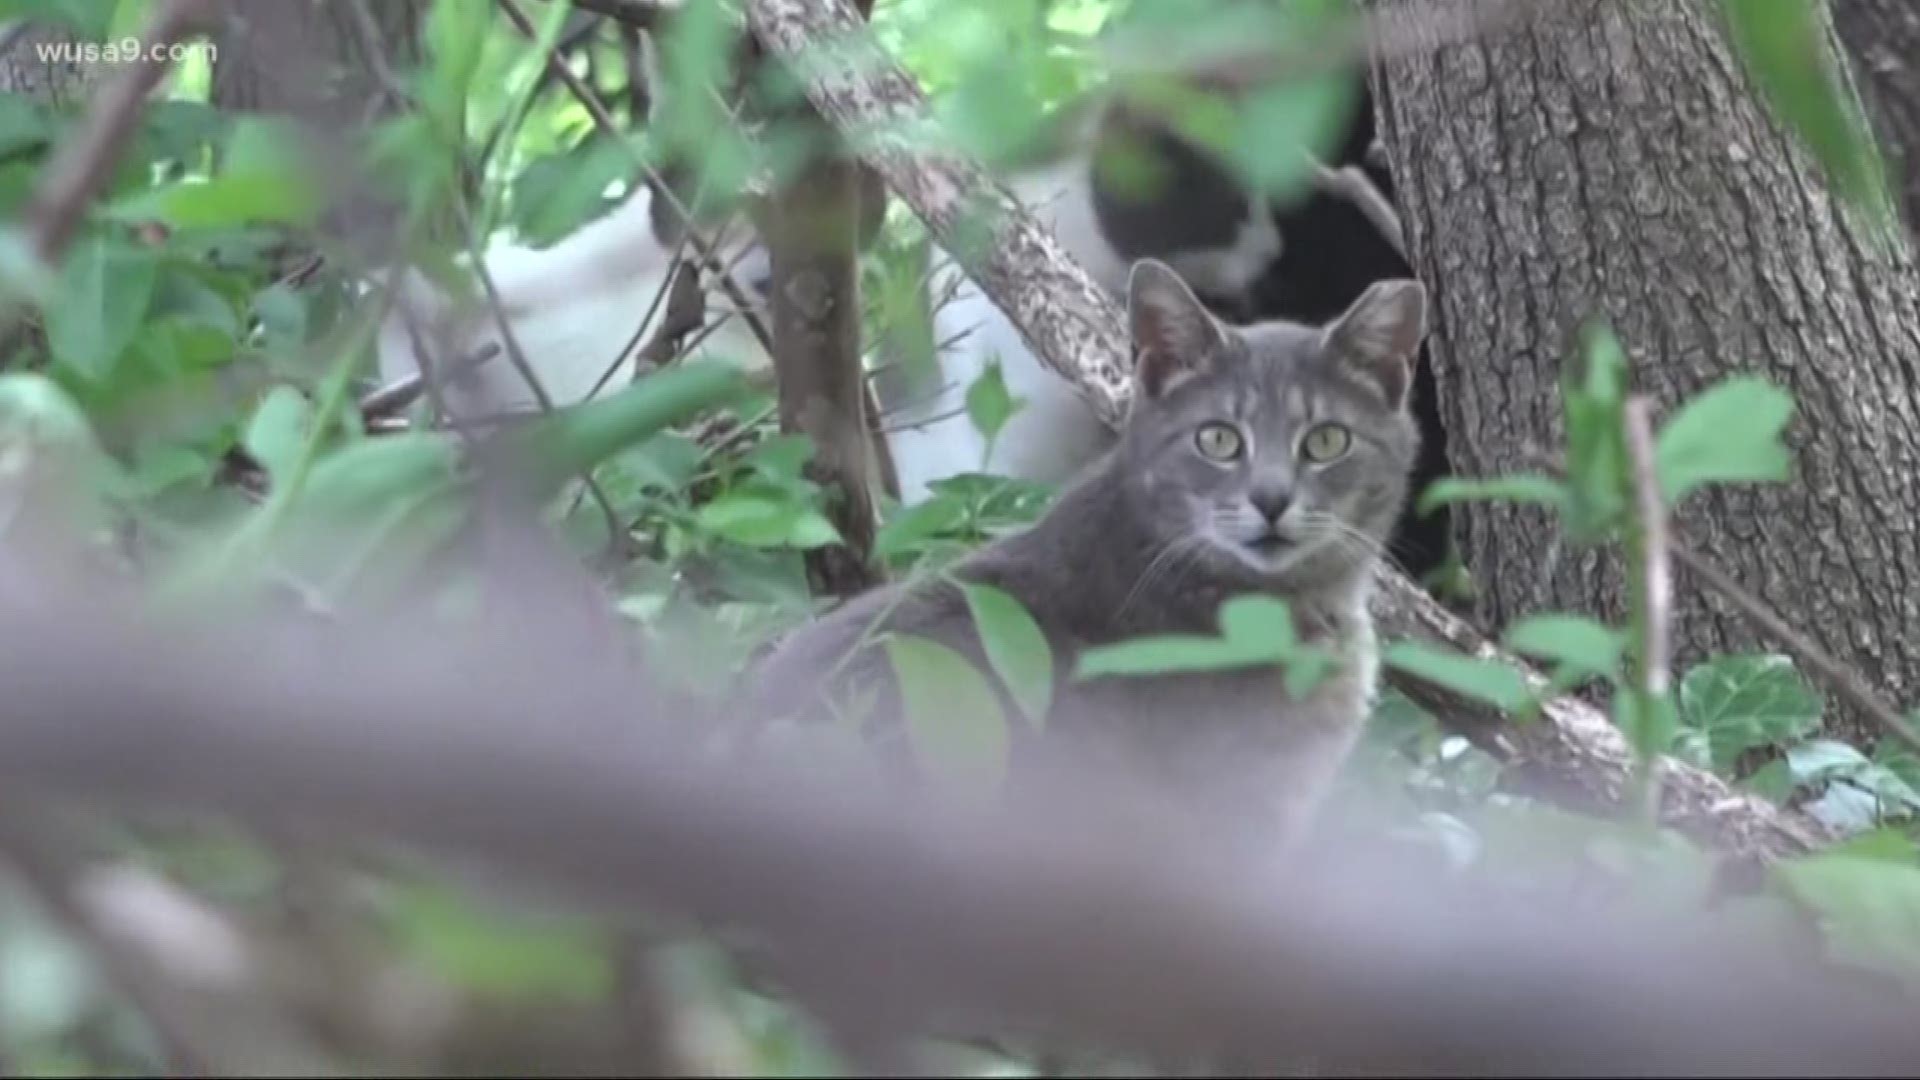 Thursday, officials ordered a clean up on the feral cat colony after a WUSA9 investigation into the 20 wild cats living behind a strip mall.